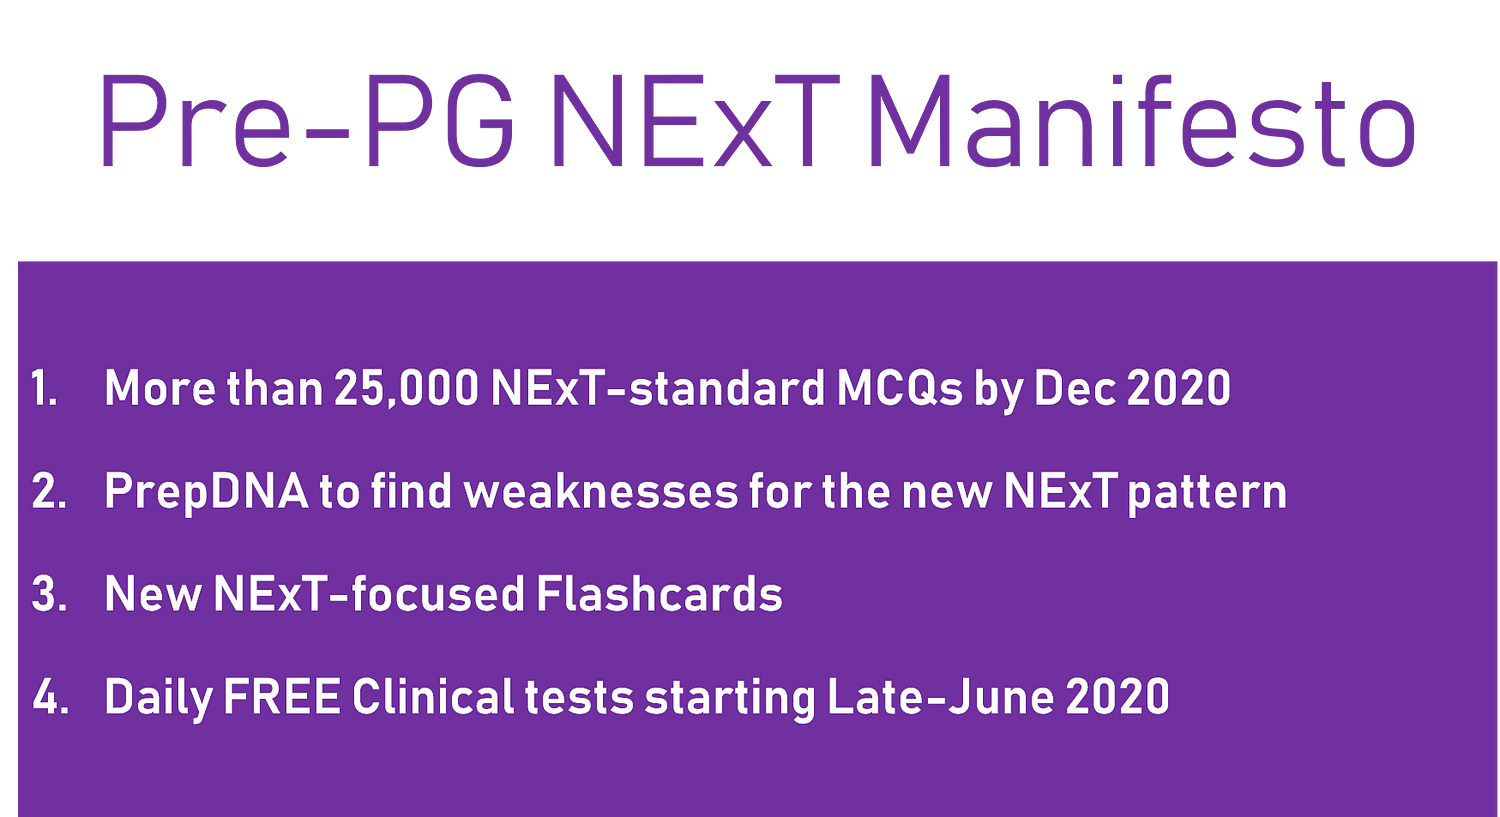 Pre-PG's manifesto for NExT (National Exit Test) - what you can expect from the Pre-PG team